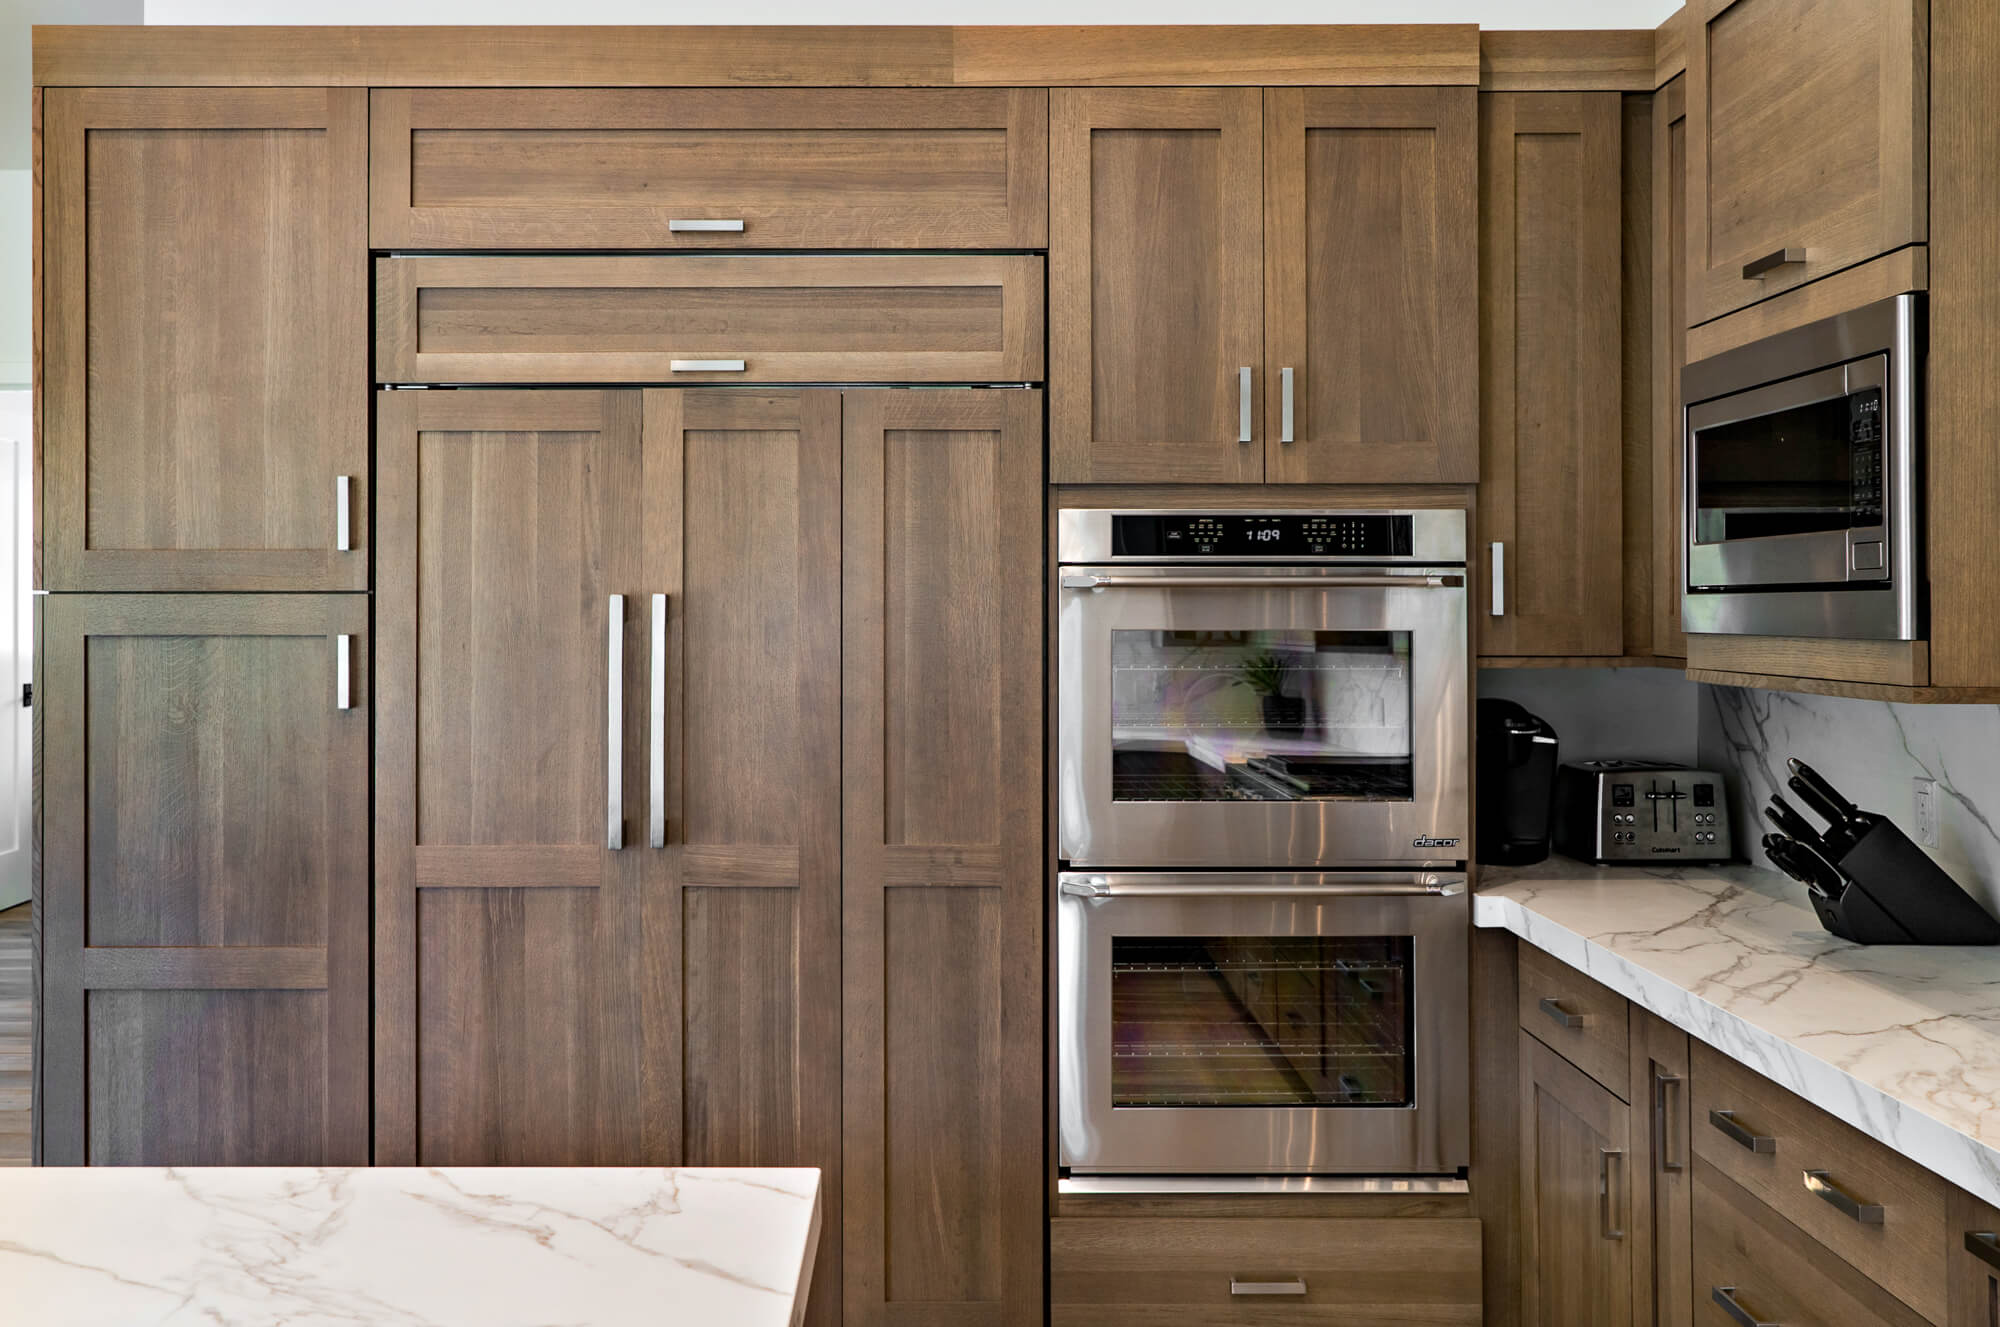 Floor to ceiling wood finish kitchen cabinetry